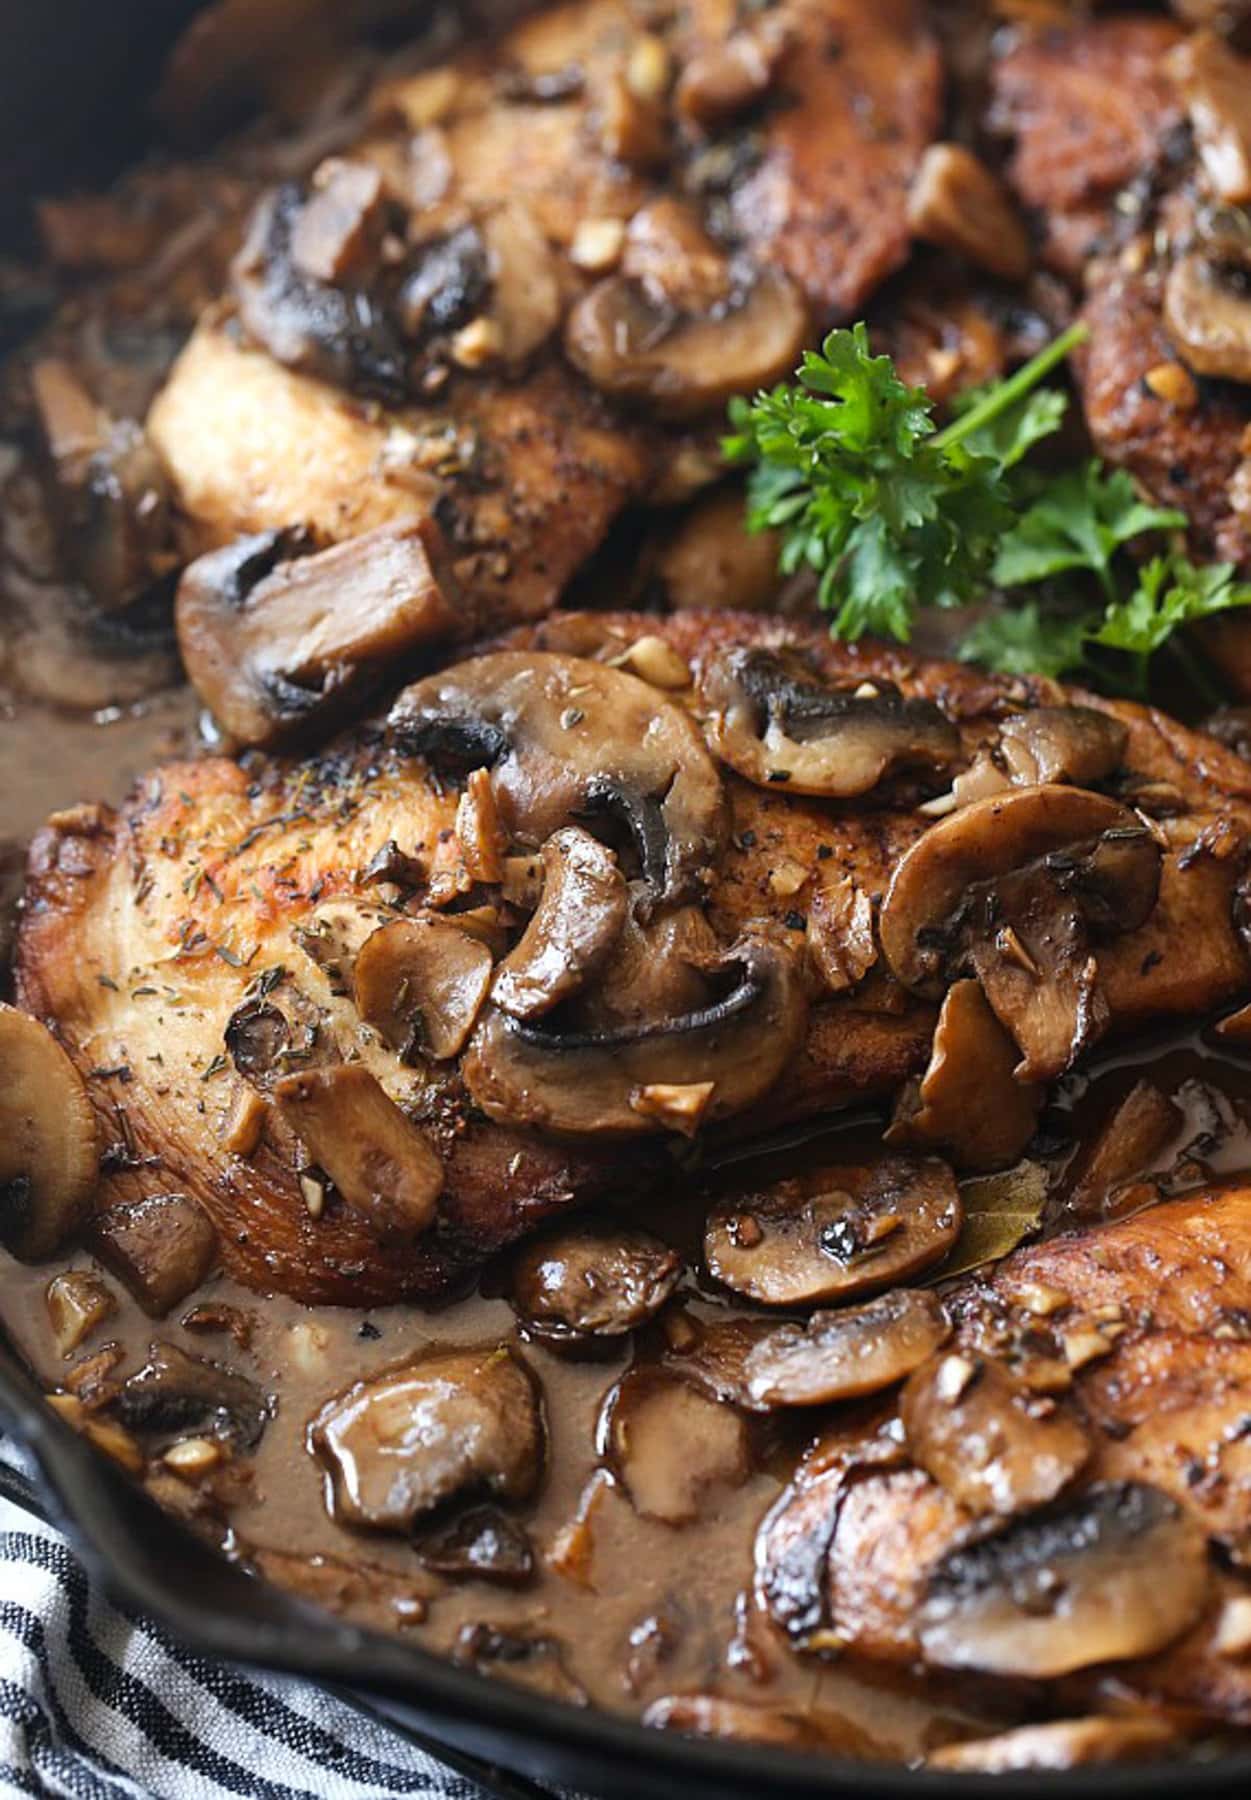 Chicken in a skillet topped with mushrooms and garlic